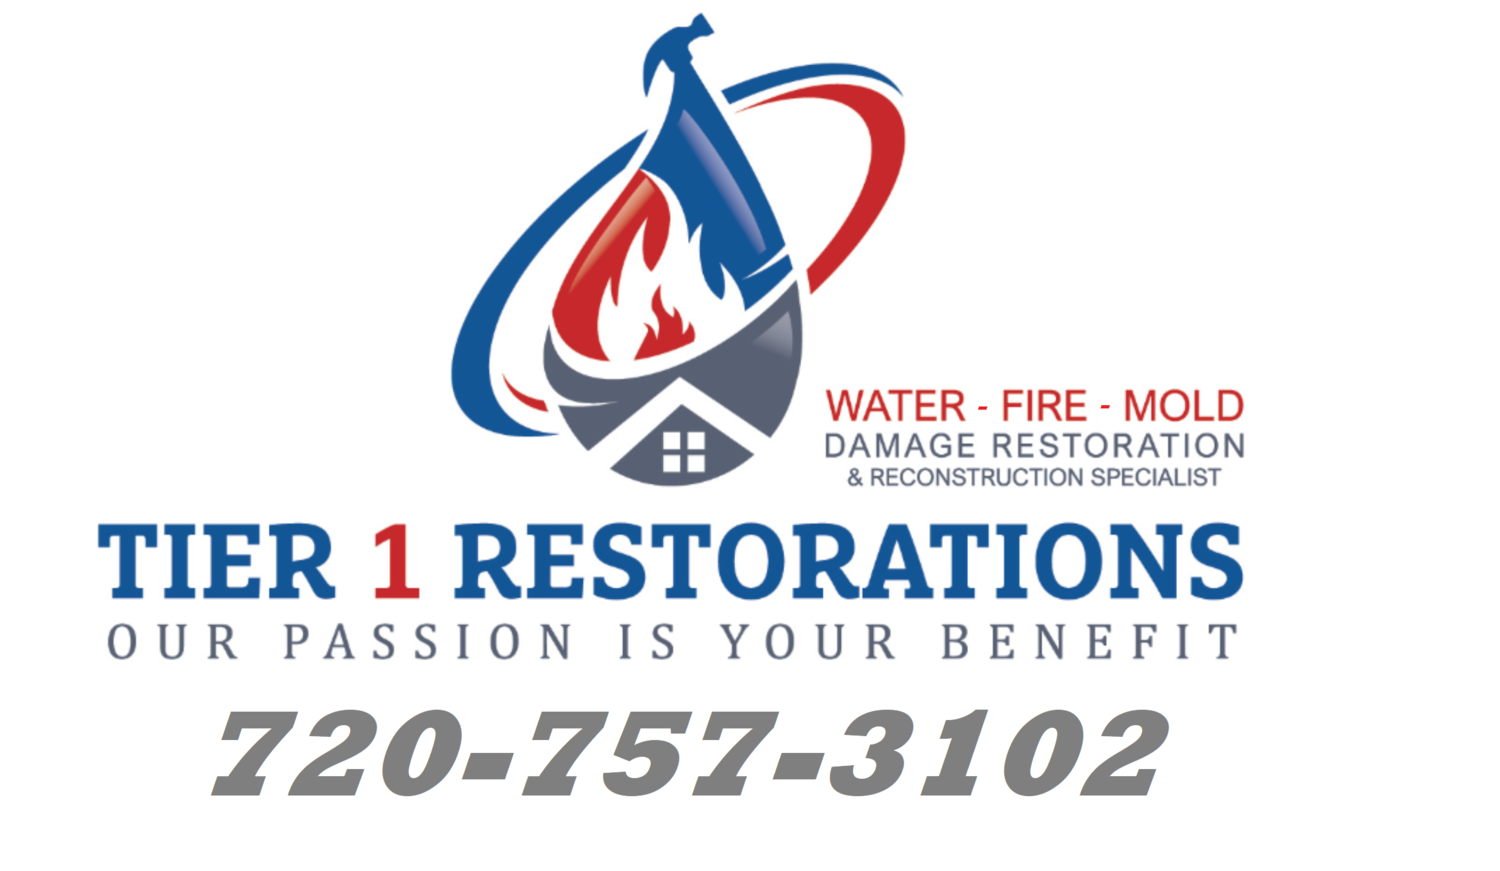 What You Should Know About Dealing With Fire Restoration - Flood and Water  Damage Experts of Colorado - ECOS Environmental